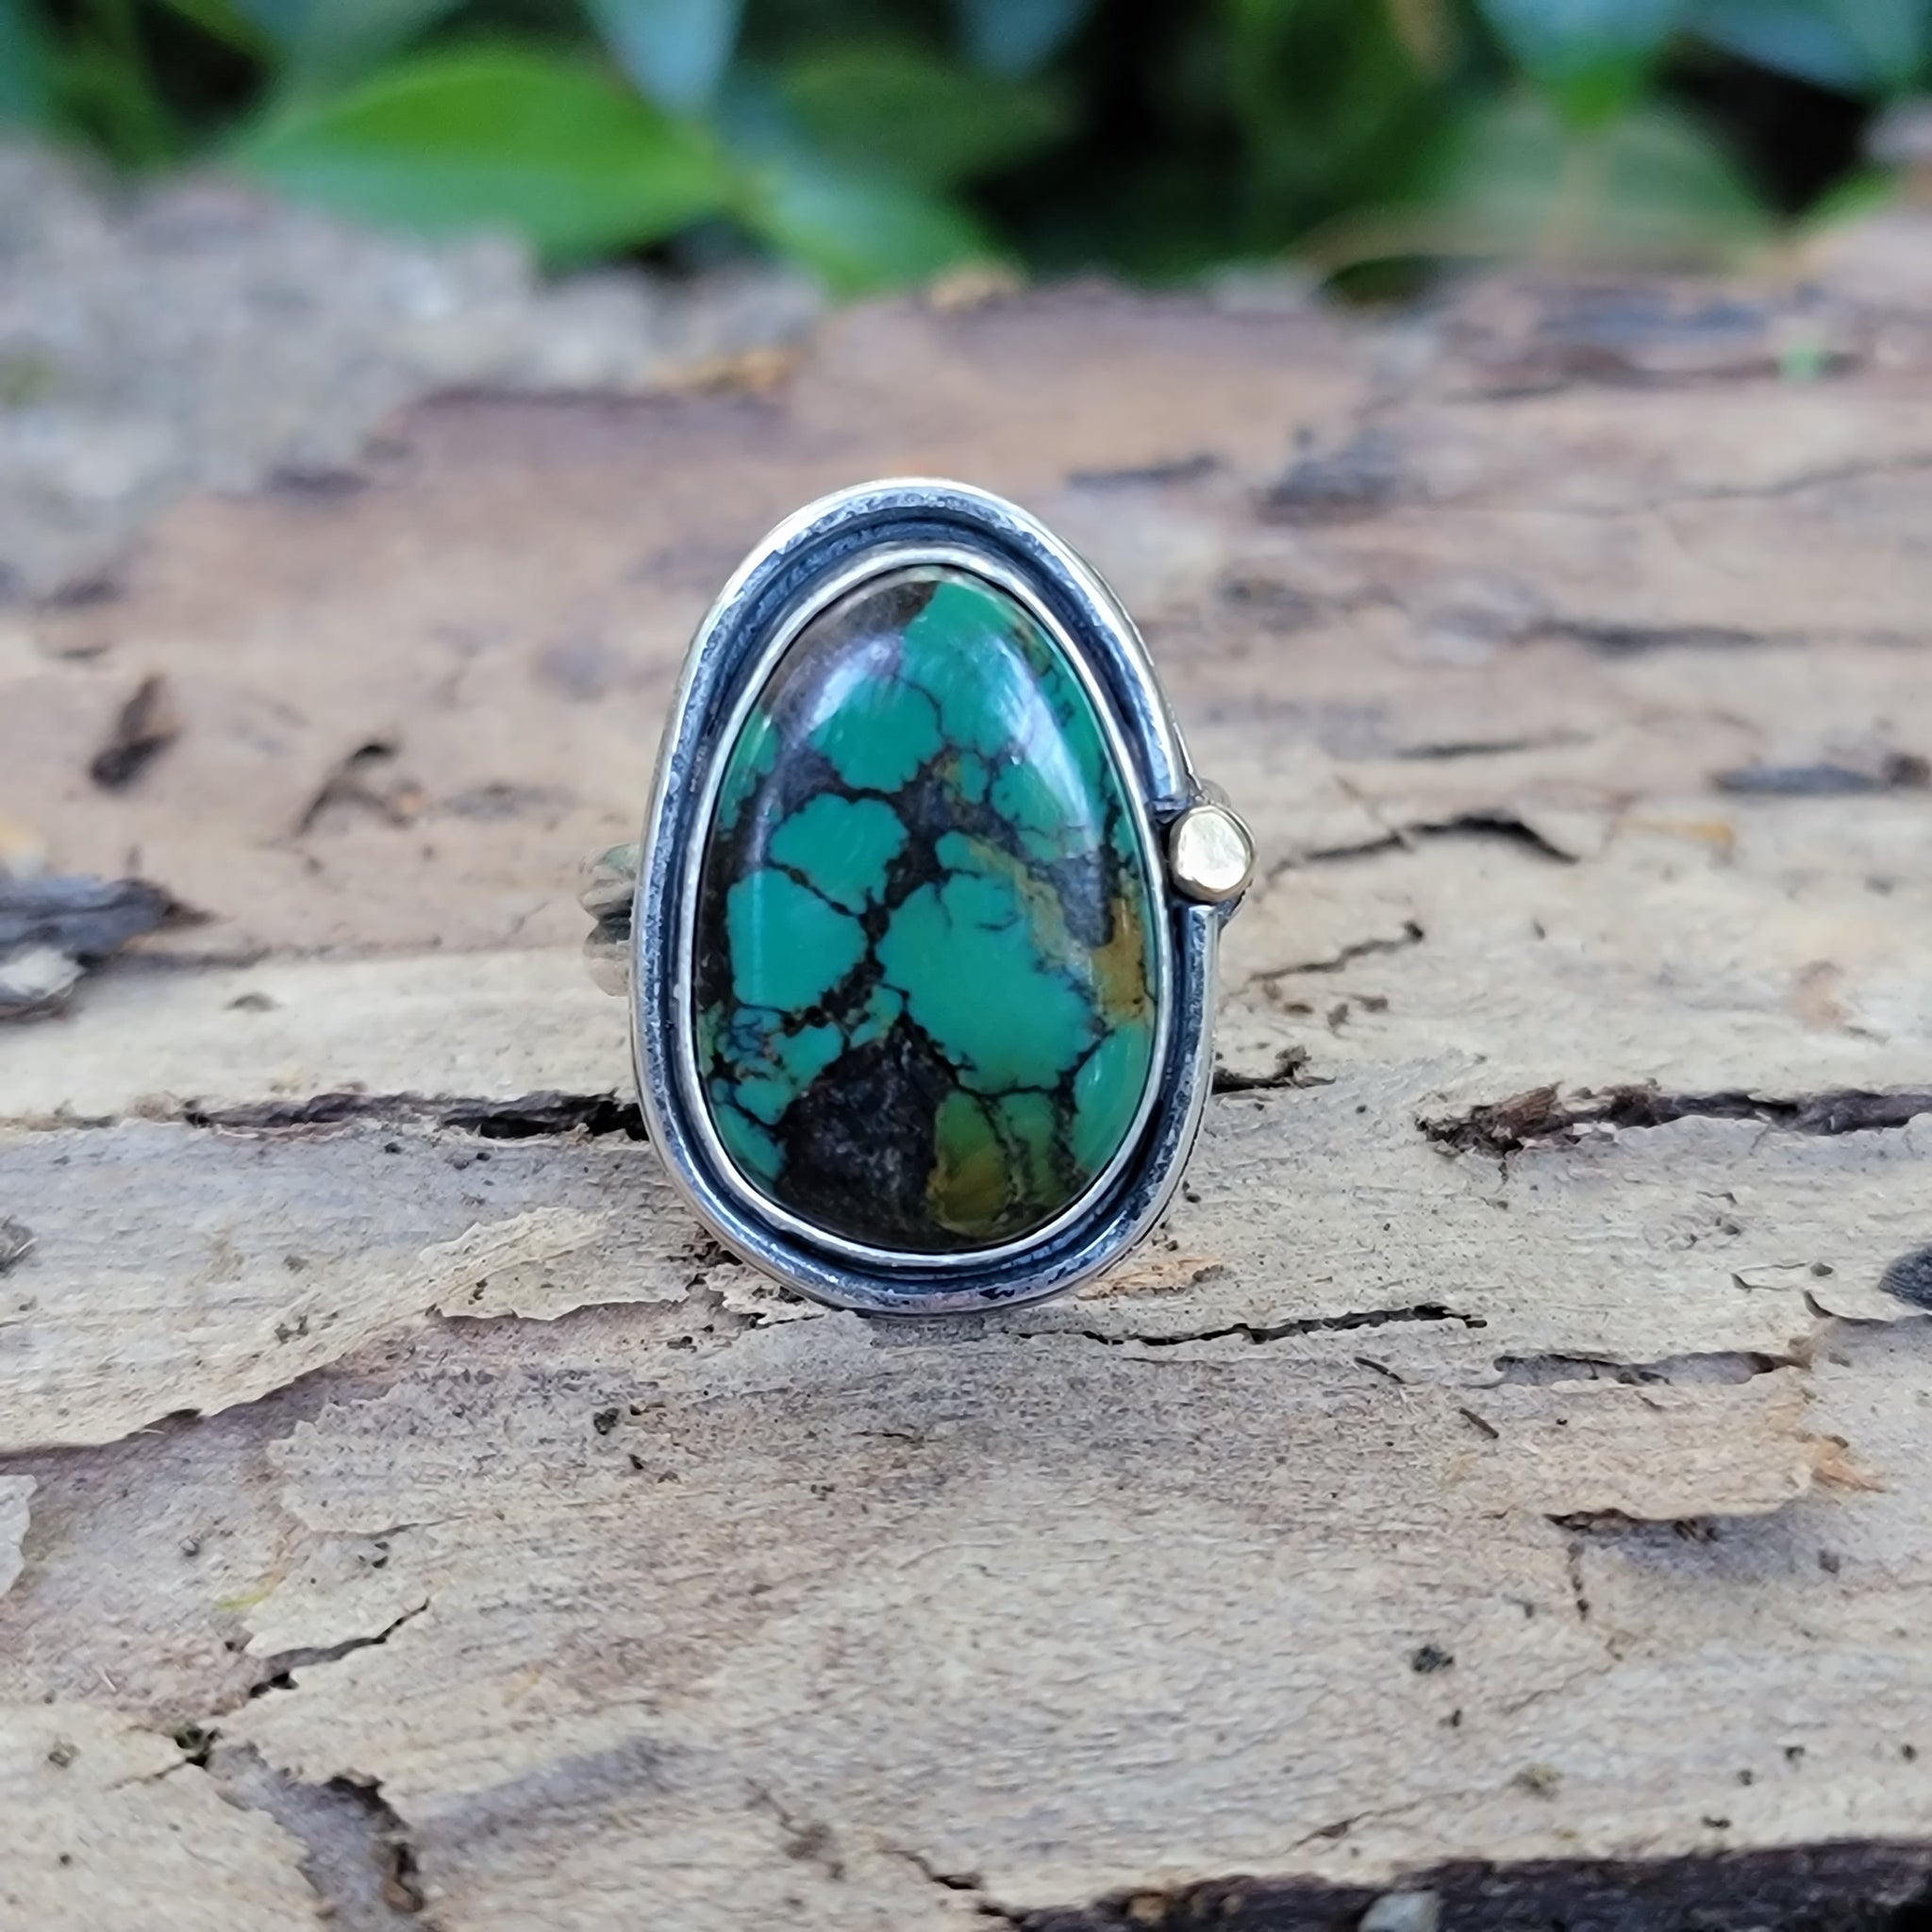 Hubei Turquoise Freeform Ring in Sterling Silver Size 11.5